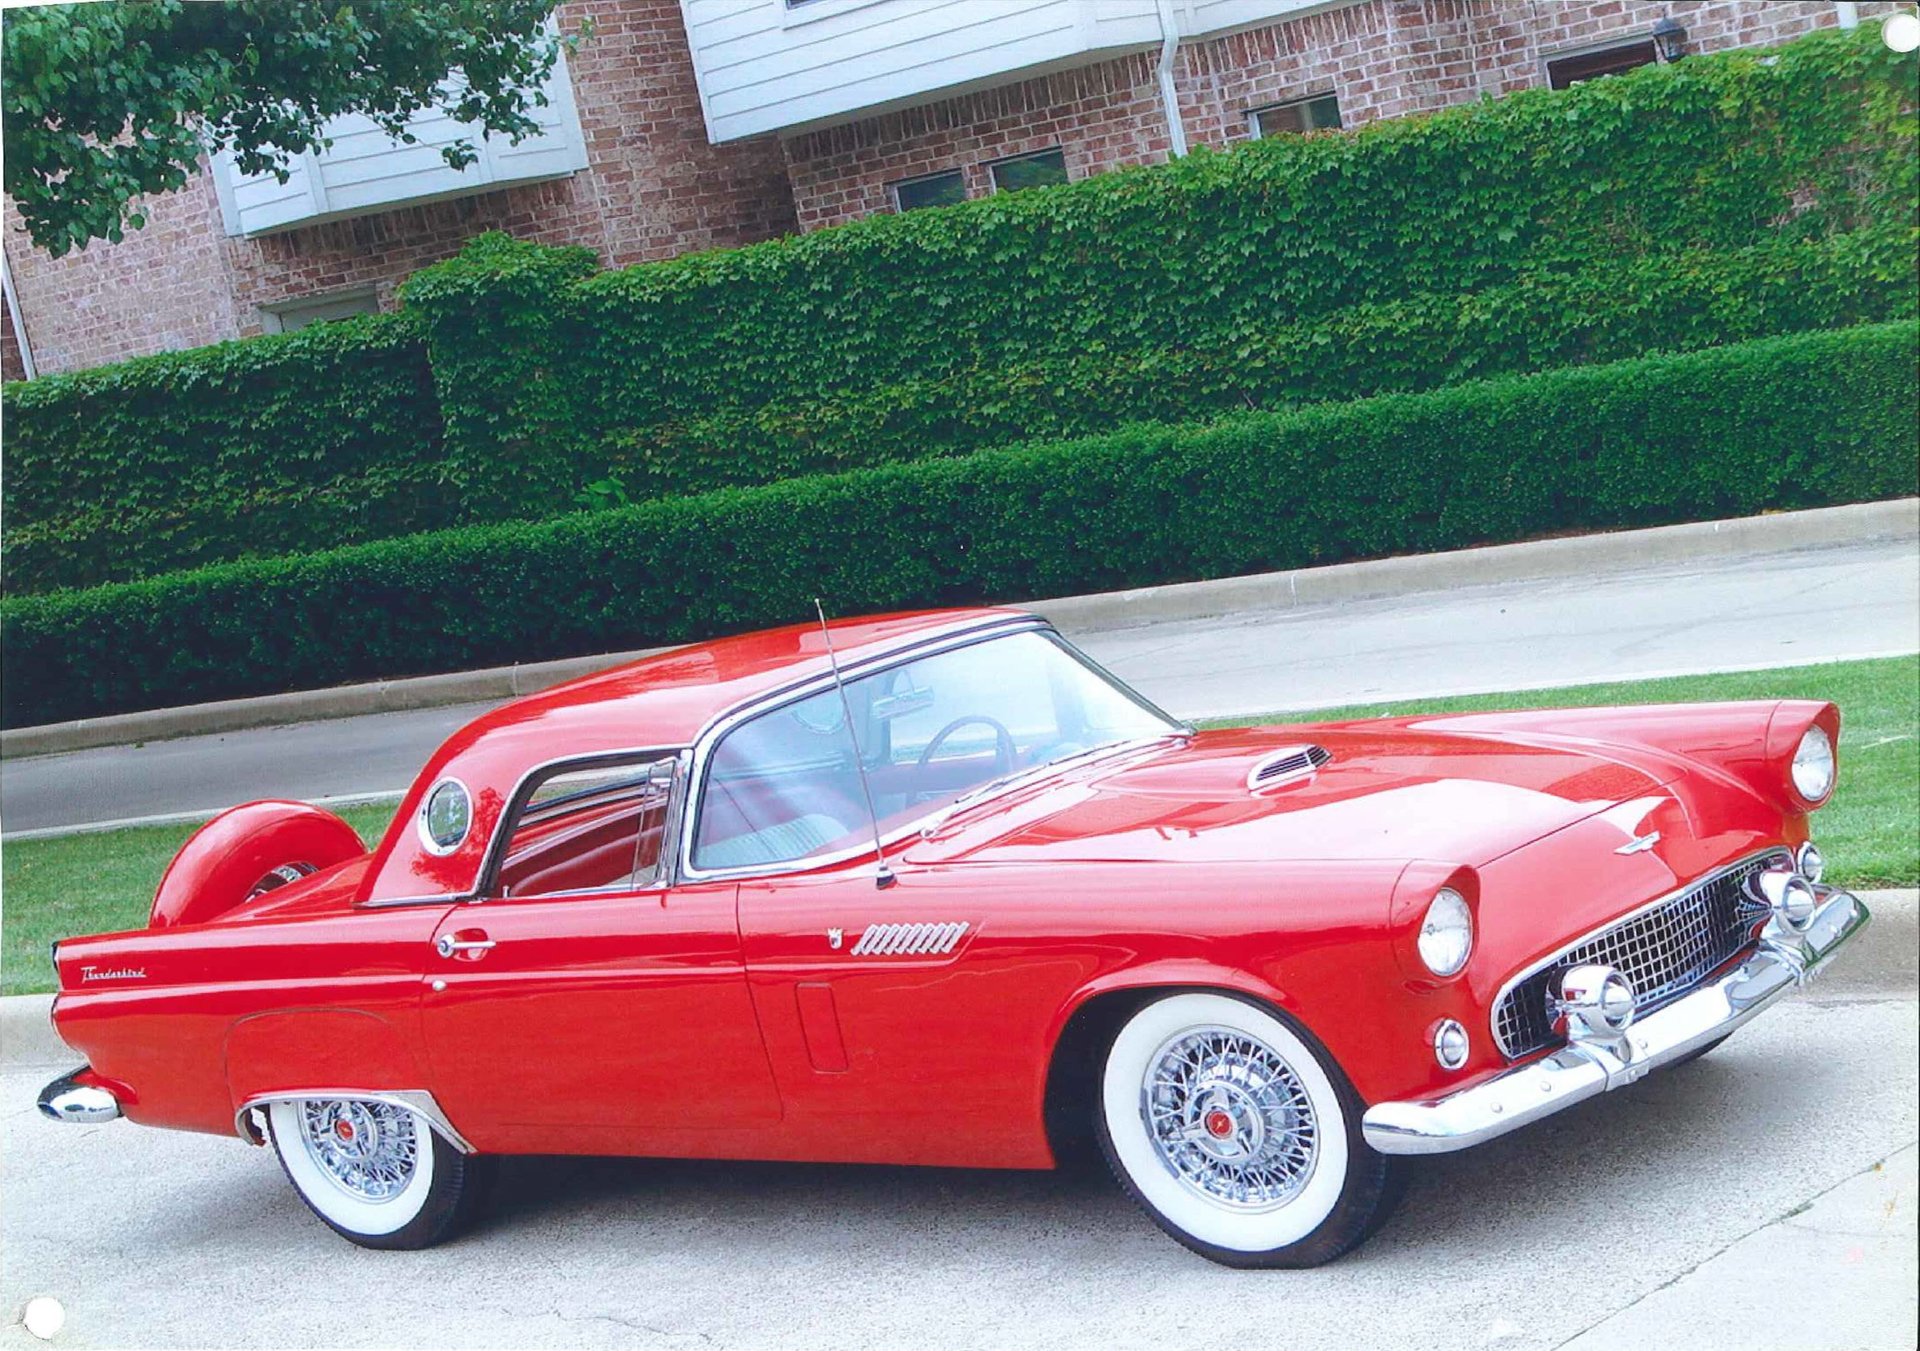 1956 ford thunderbird sold by amos minter